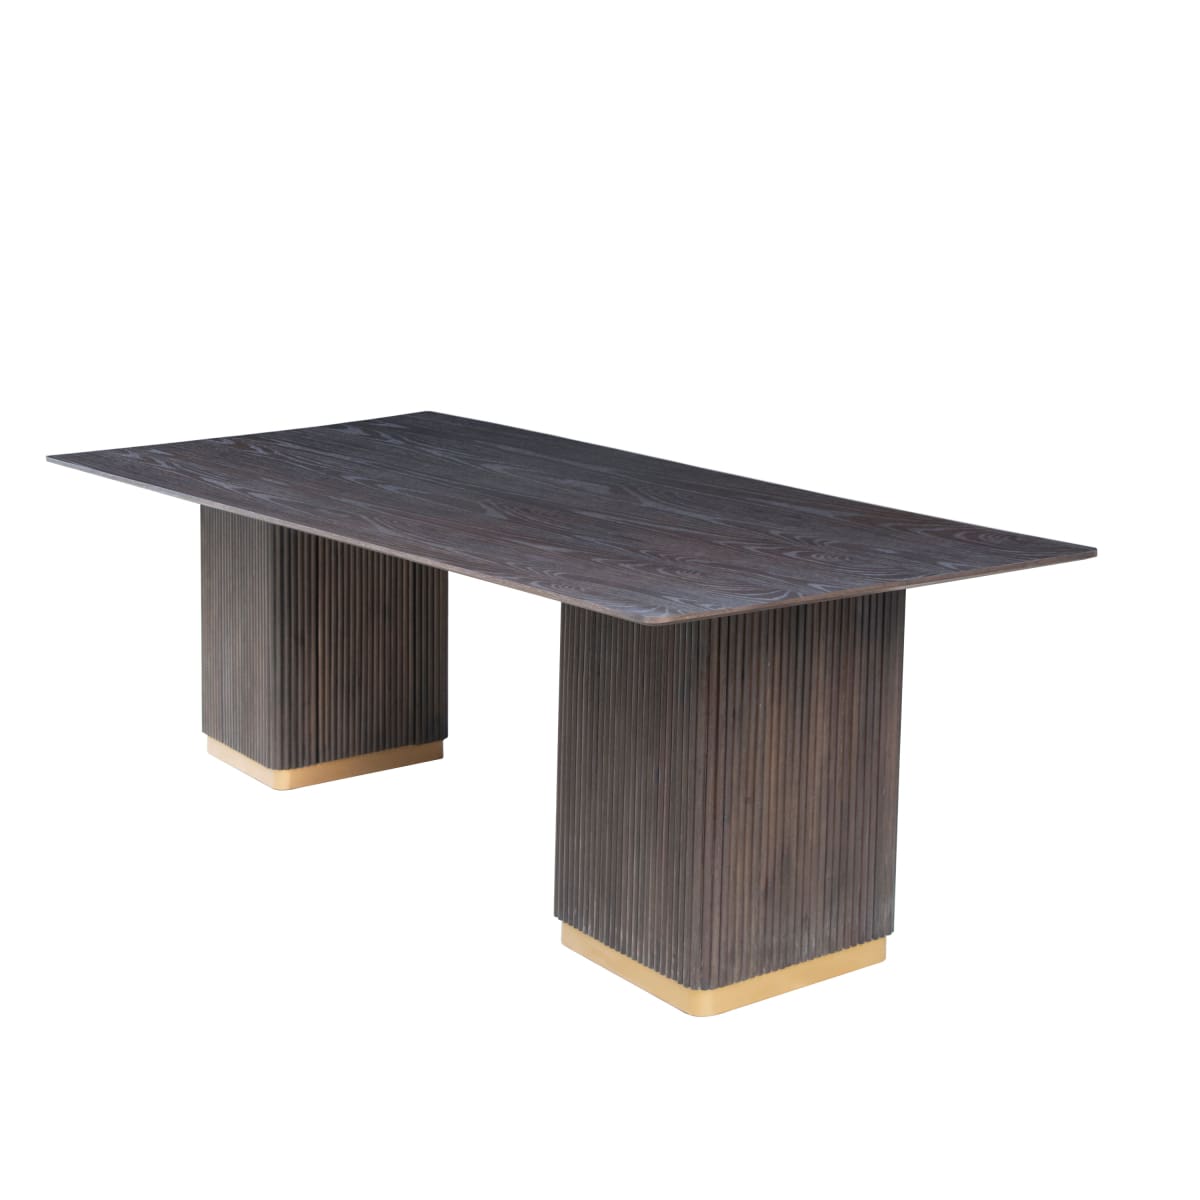 Cross Island Dining Table - dining - table